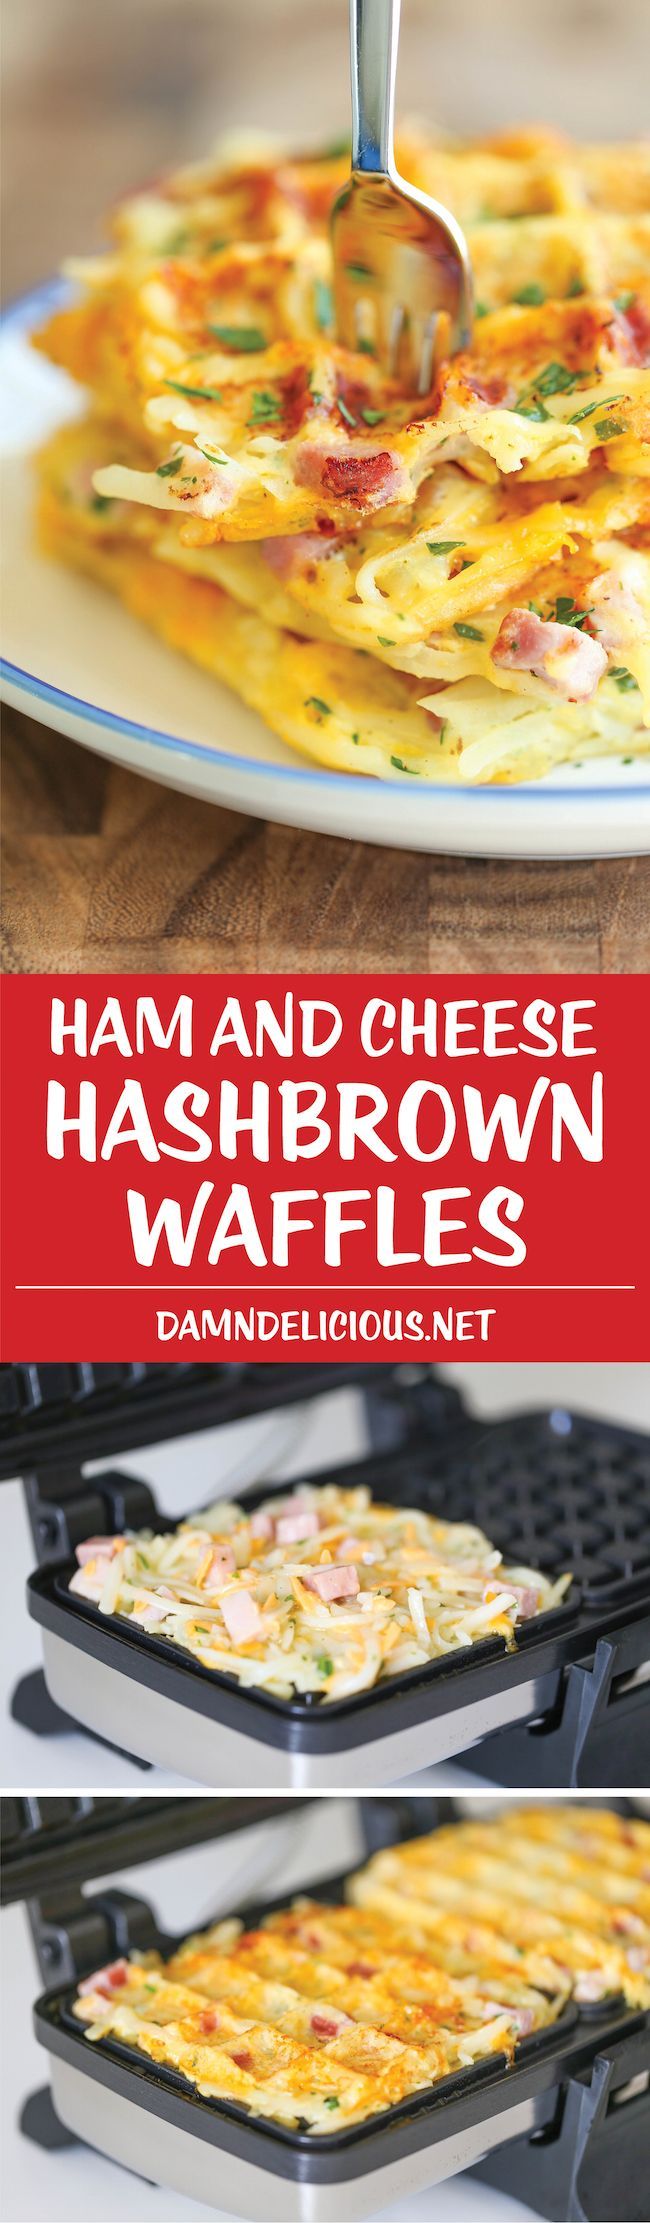 Ham and Cheese Hashbrown Waffles – Southern food, easy breakfast recipe